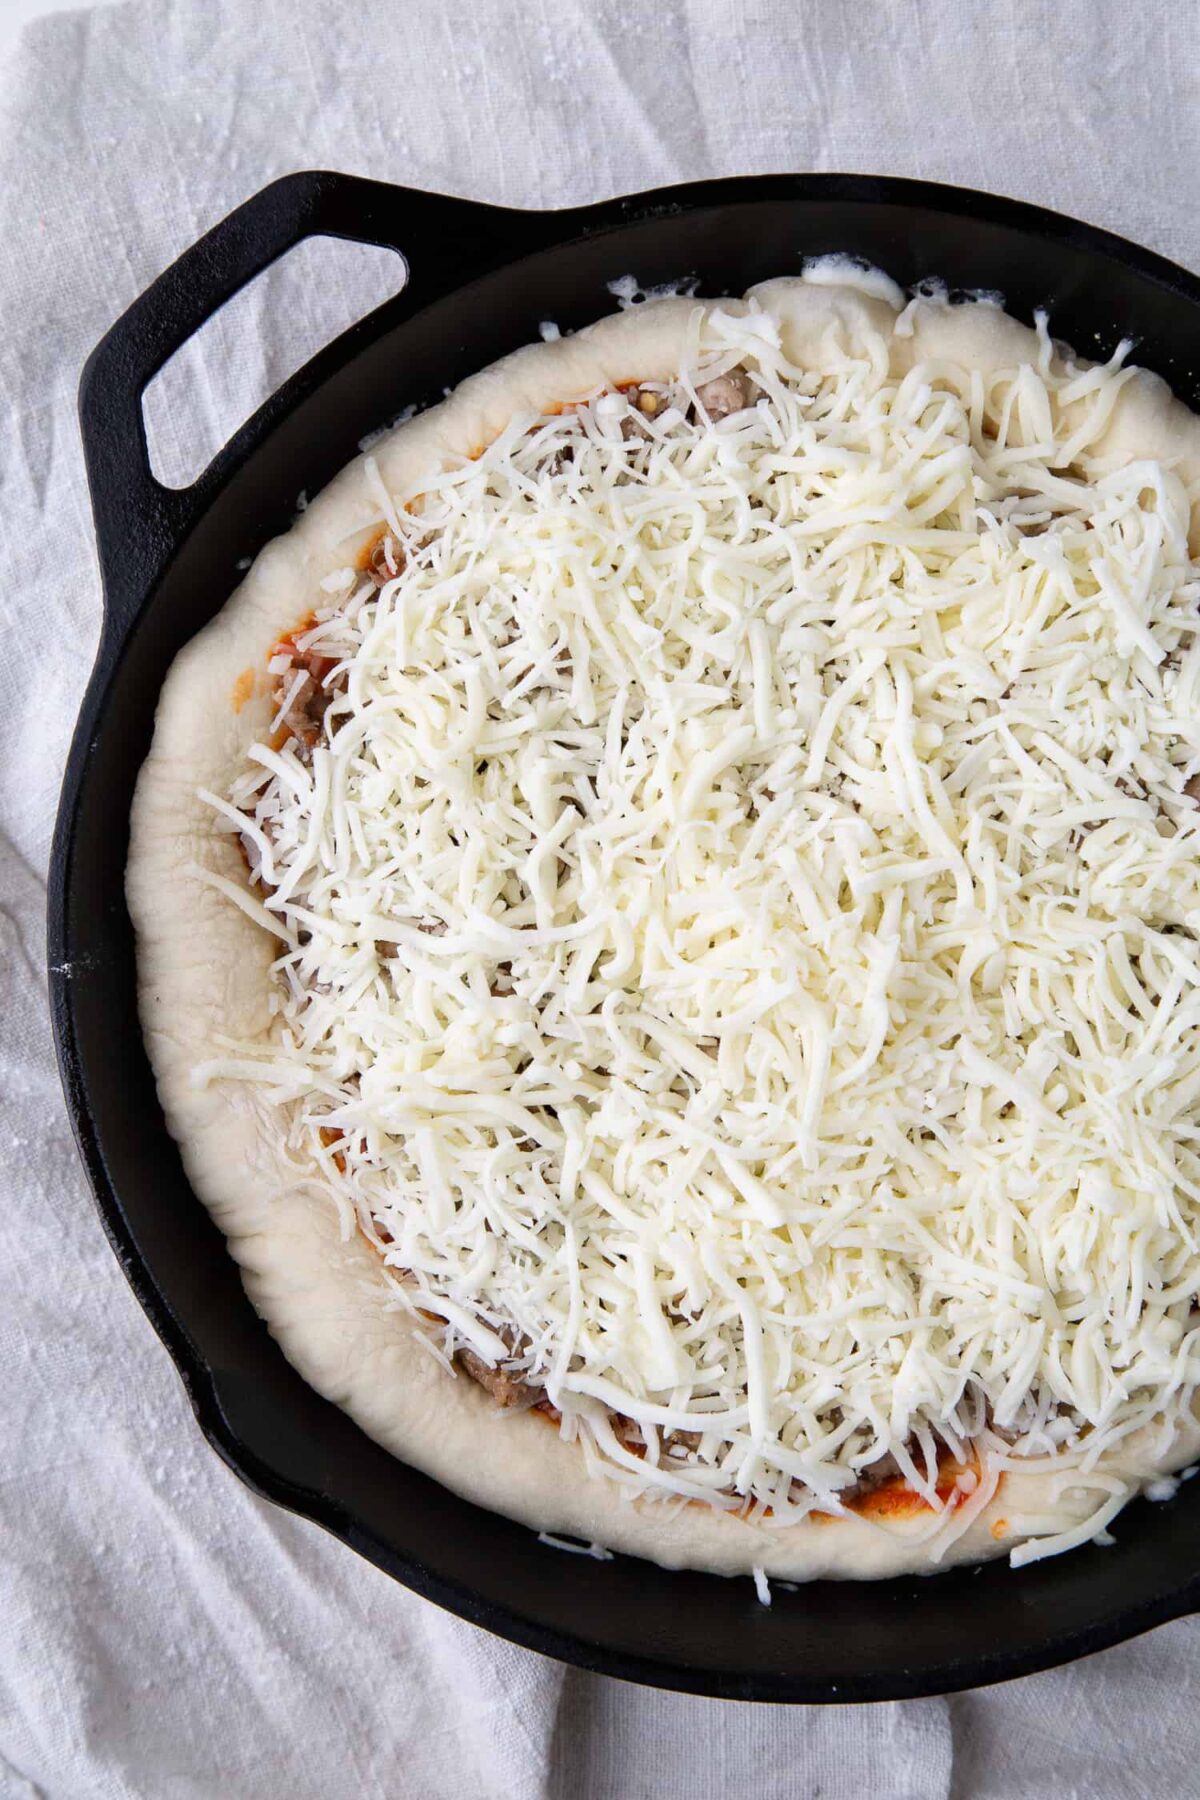 Uncooked pizza with lots of cheese in a cast iron skillet.